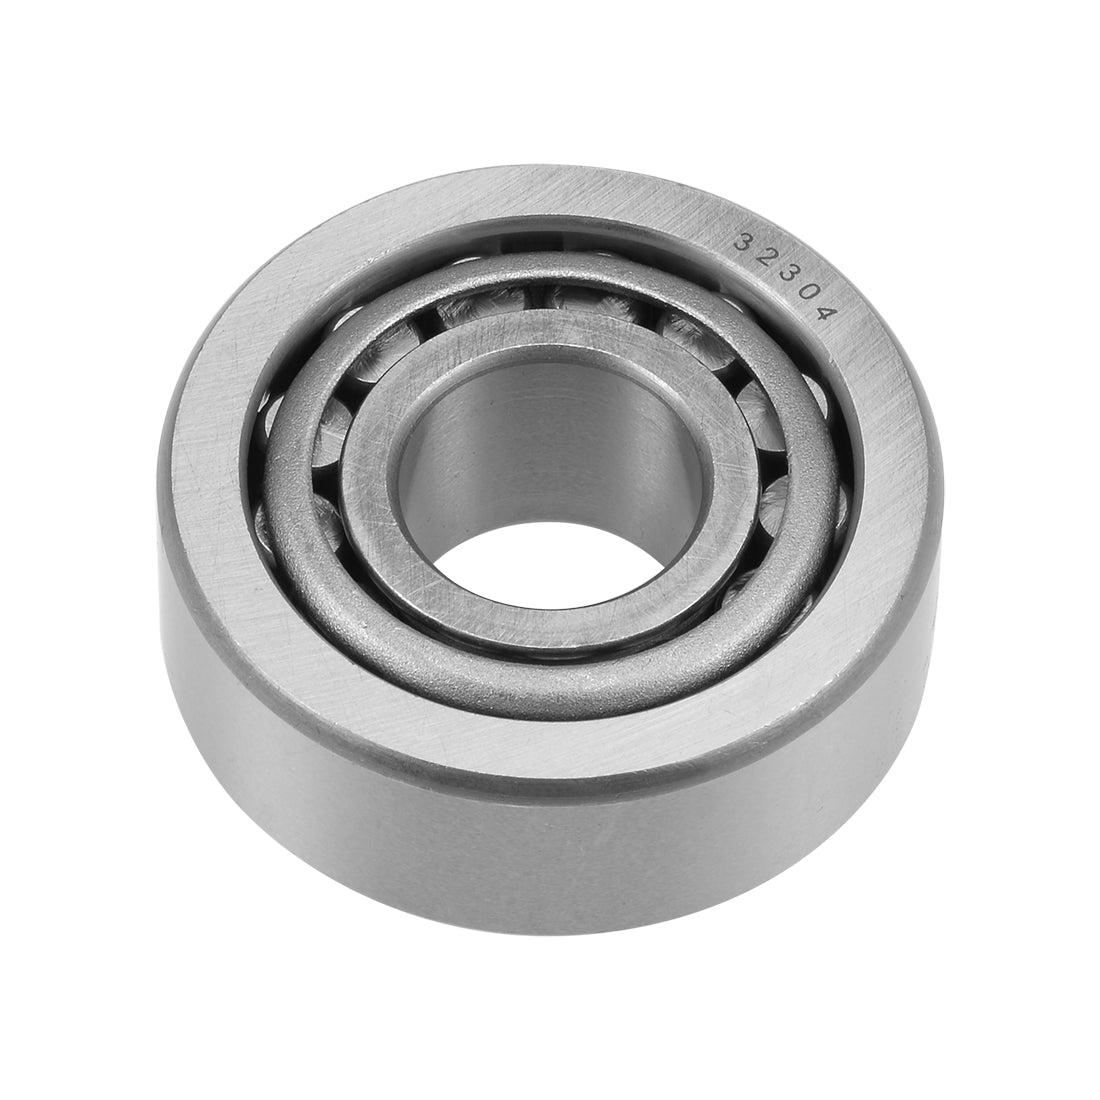 uxcell Uxcell 32304 Tapered Roller Bearing Cone and Cup Set 20mm Bore 52mm OD 21mm Width 2pcs